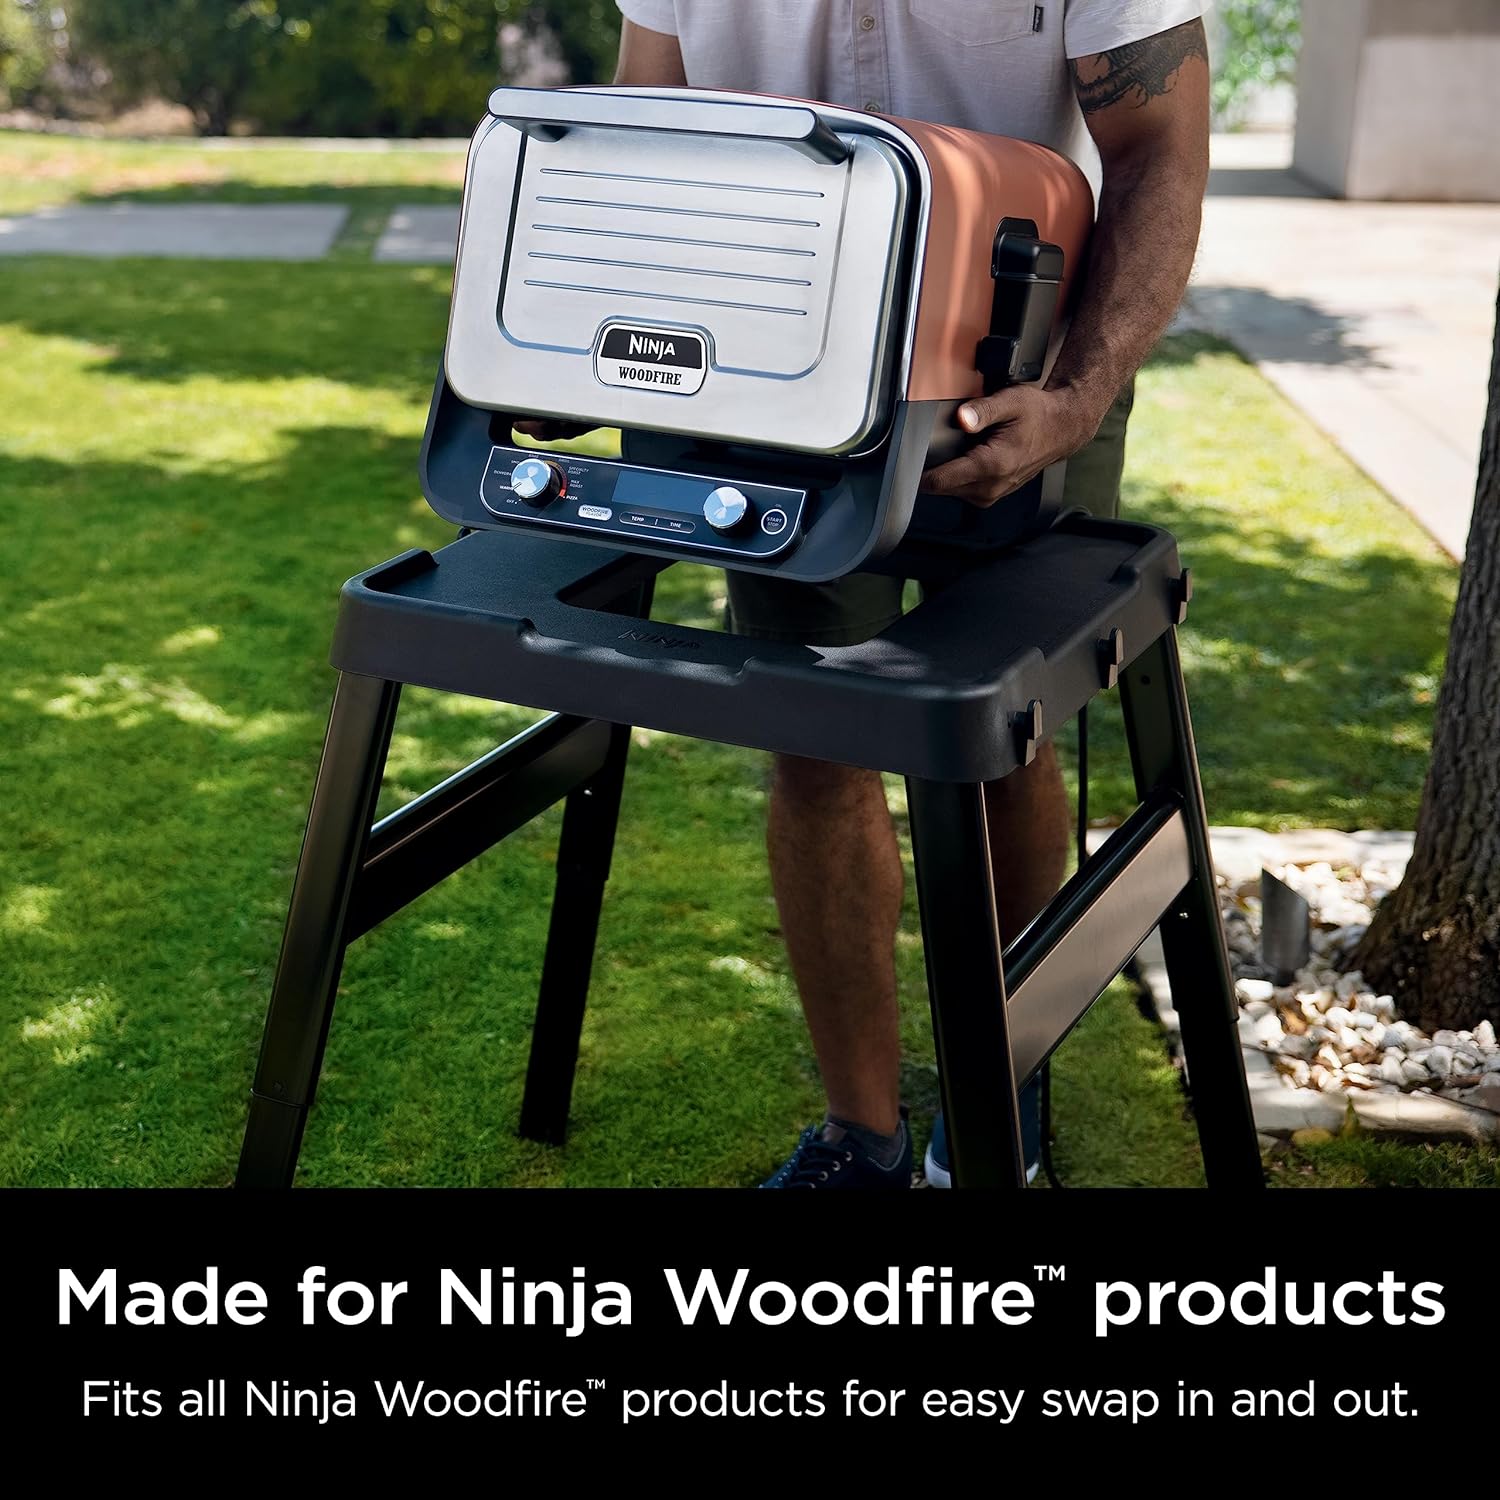 Ninja OG850 Woodfire Pro XL Outdoor Grill  Smoker with Built-In Thermometer, 4-in-1 Master Grill, BBQ Smoker, Outdoor Air Fryer, Bake, Portable, Electric, Blue - Ninja OG850 Woodfire Pro XL Outdoor Grill & Smoker Review